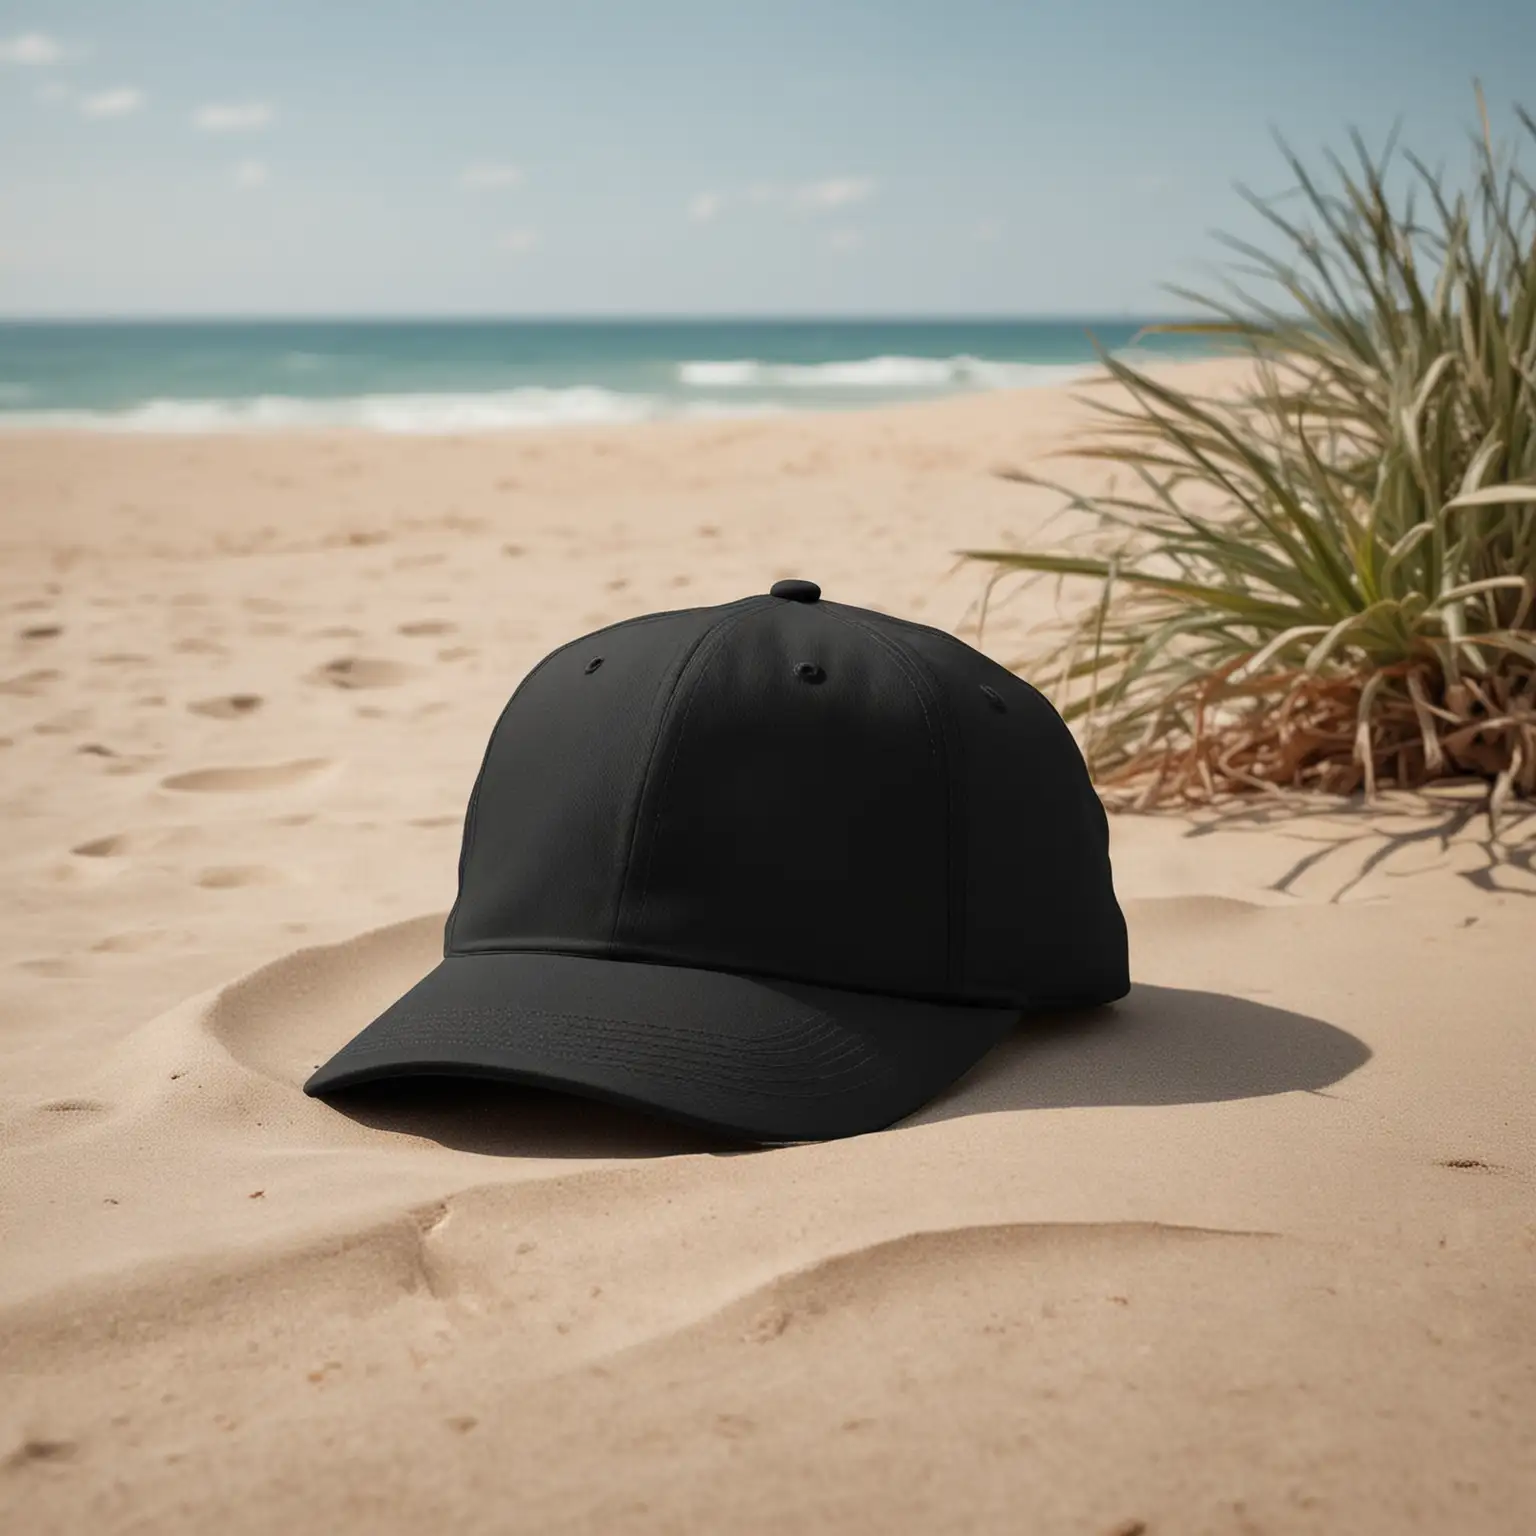 amockup for a black baseball hat.  the model should be male and should be relaxing on a beach